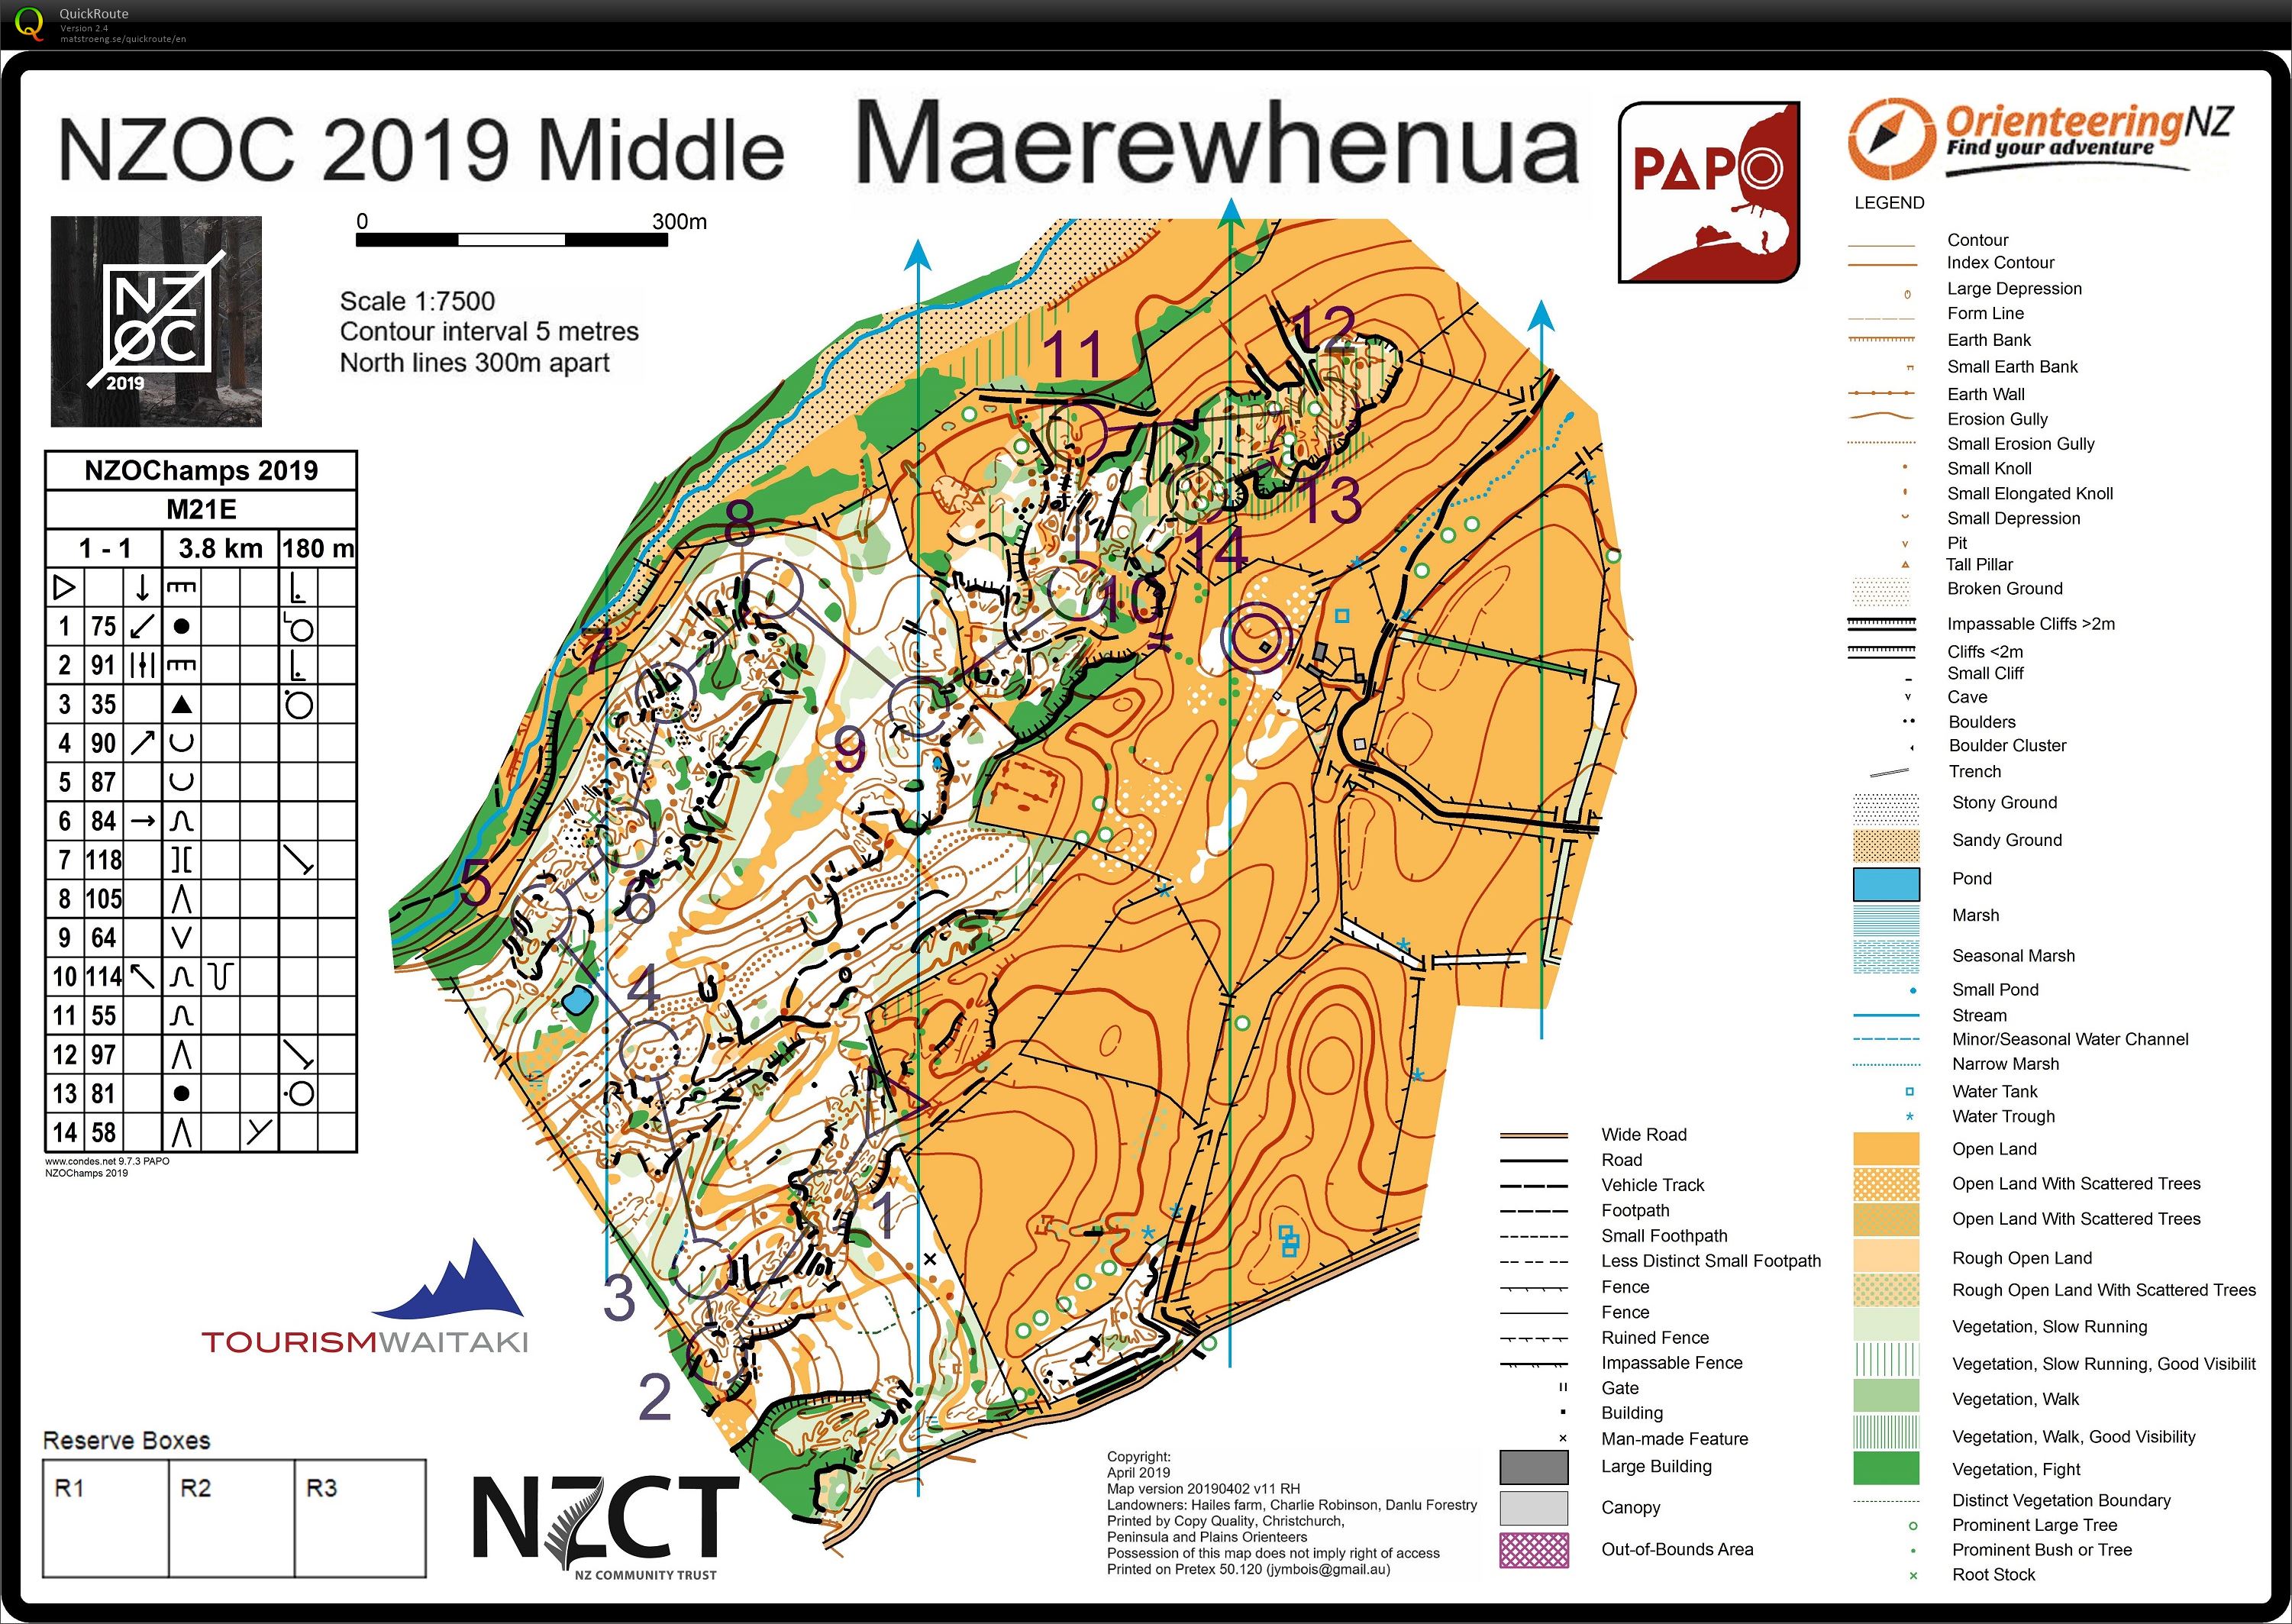 NZ Champs Middle pt 1 (20/04/2019)